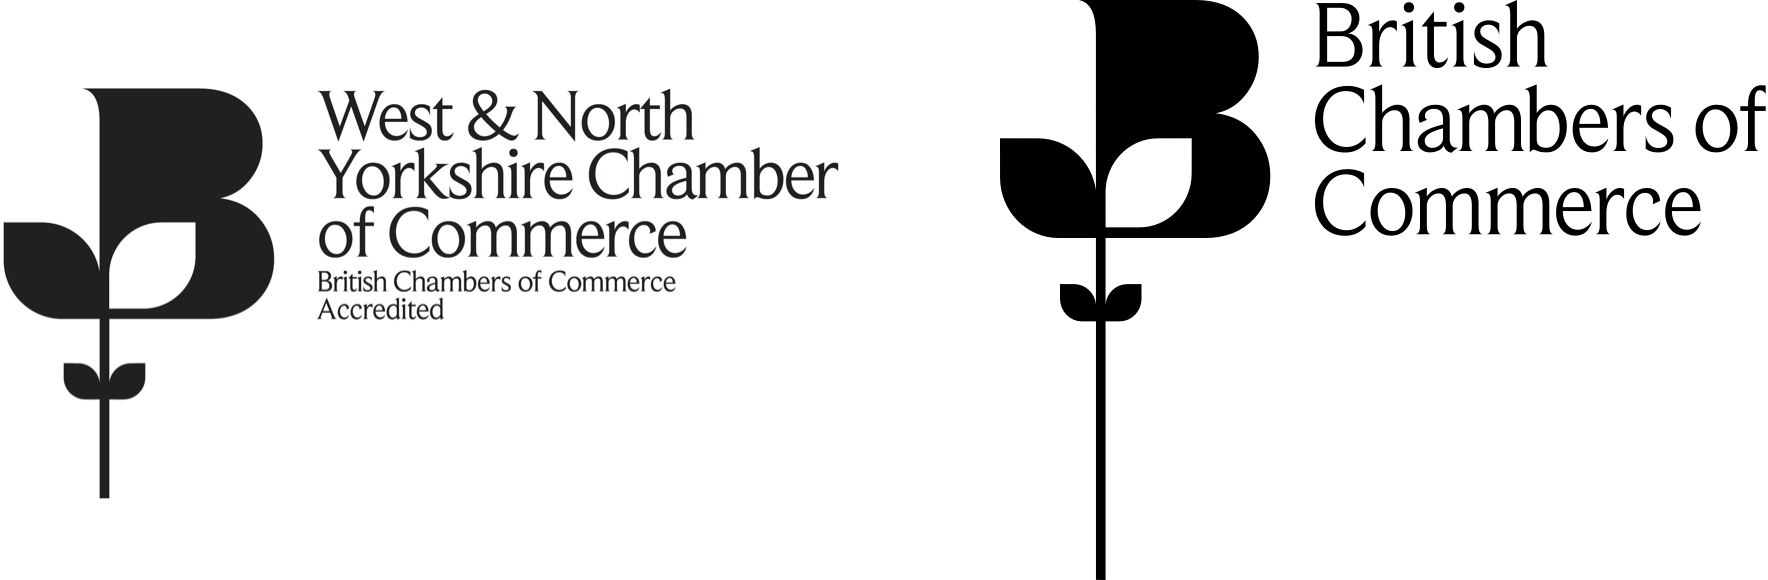 West & North Yorkshire Chamber of Commerce